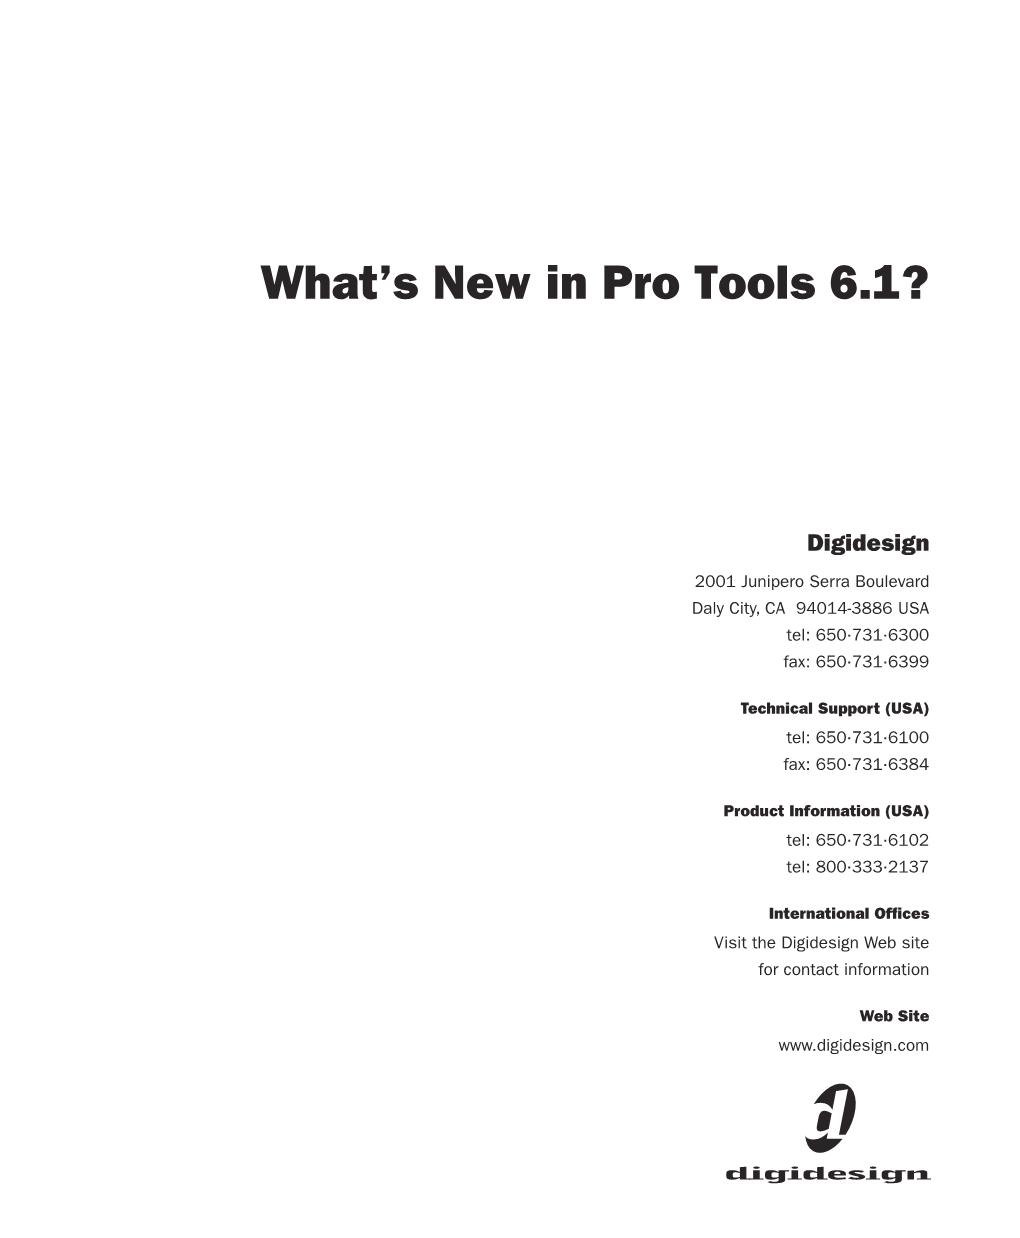 What's New in Pro Tools